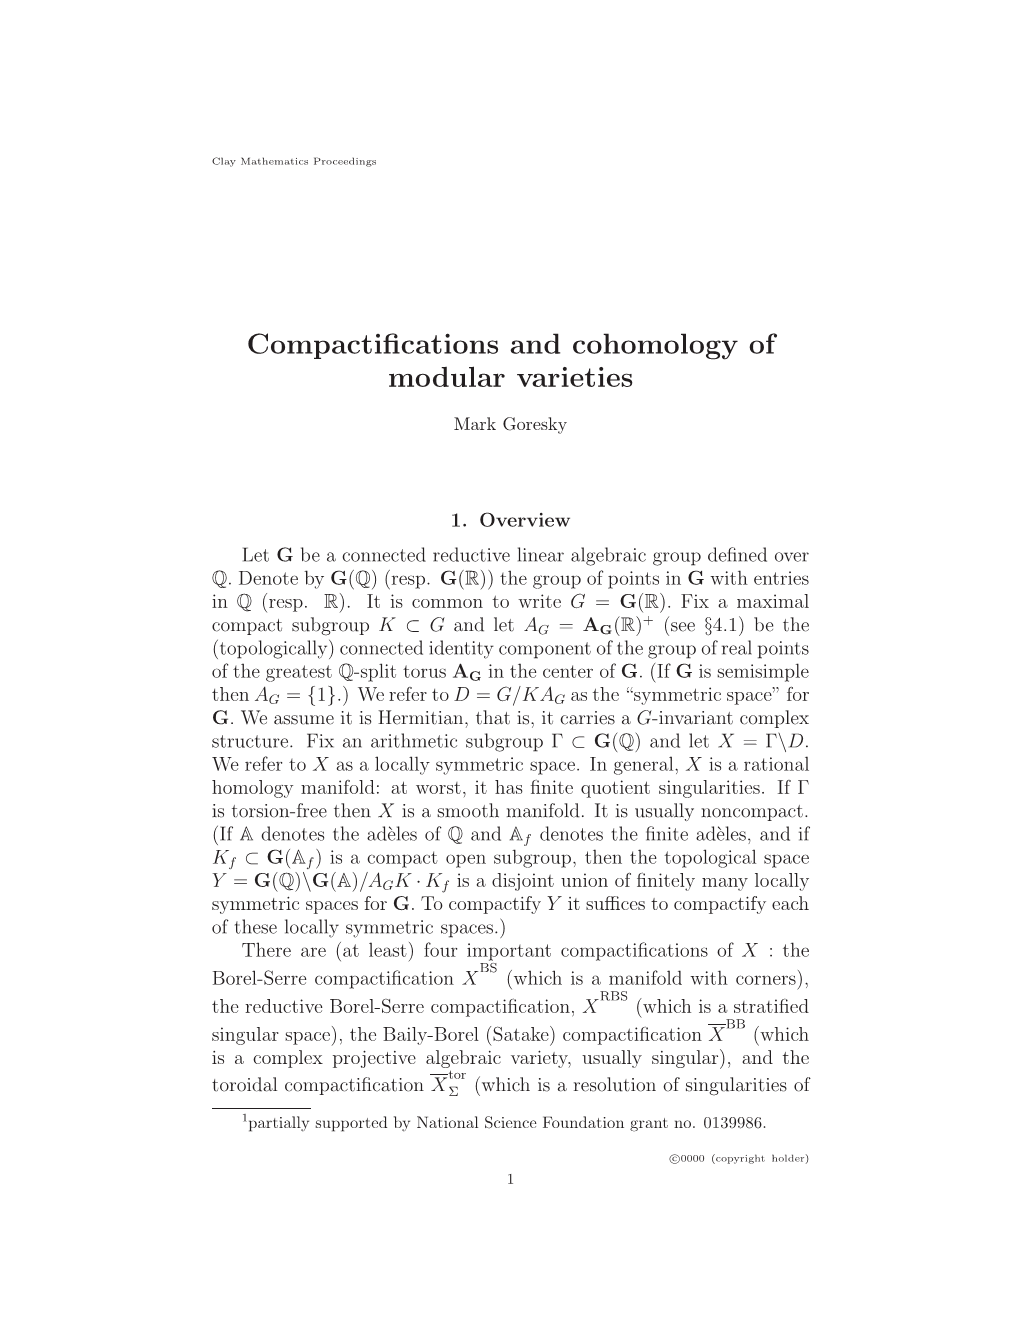 Compactifications and Cohomology of Modular Varieties